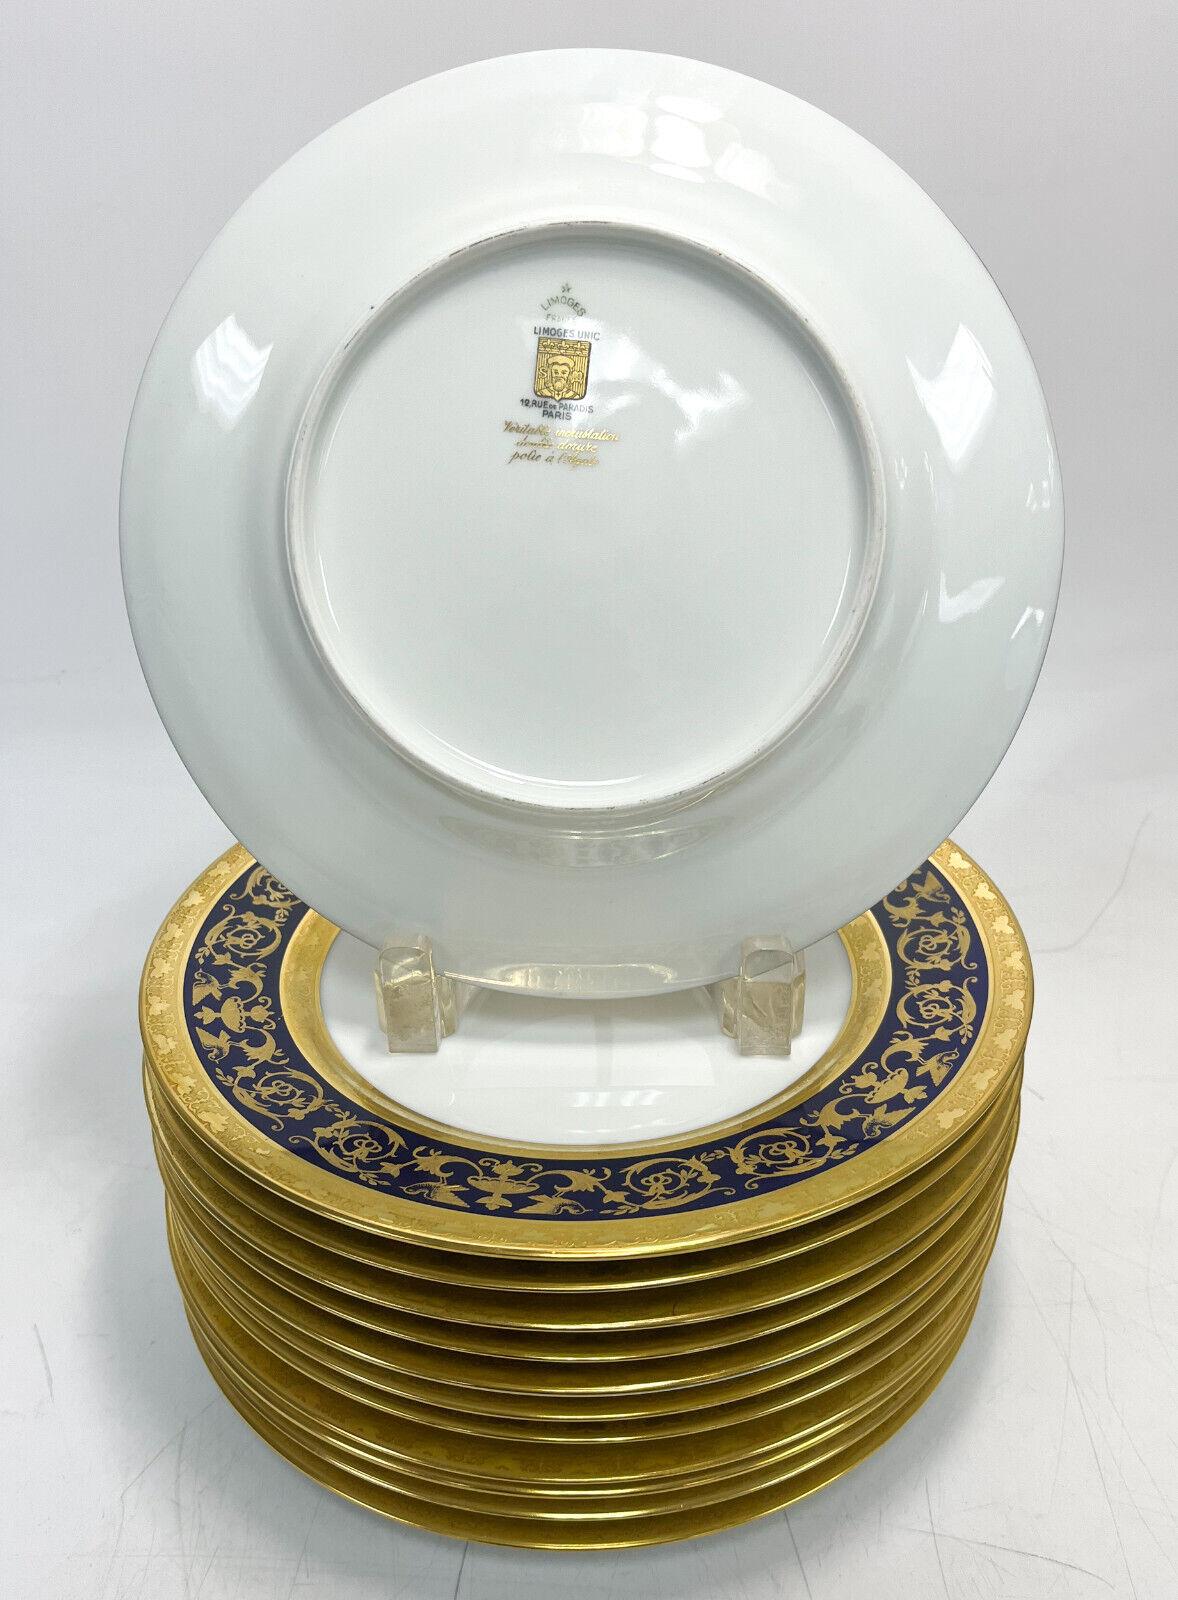  12 Limoges Raynaud Porcelain Dessert or Salad Plates in Pompei In Good Condition For Sale In Gardena, CA